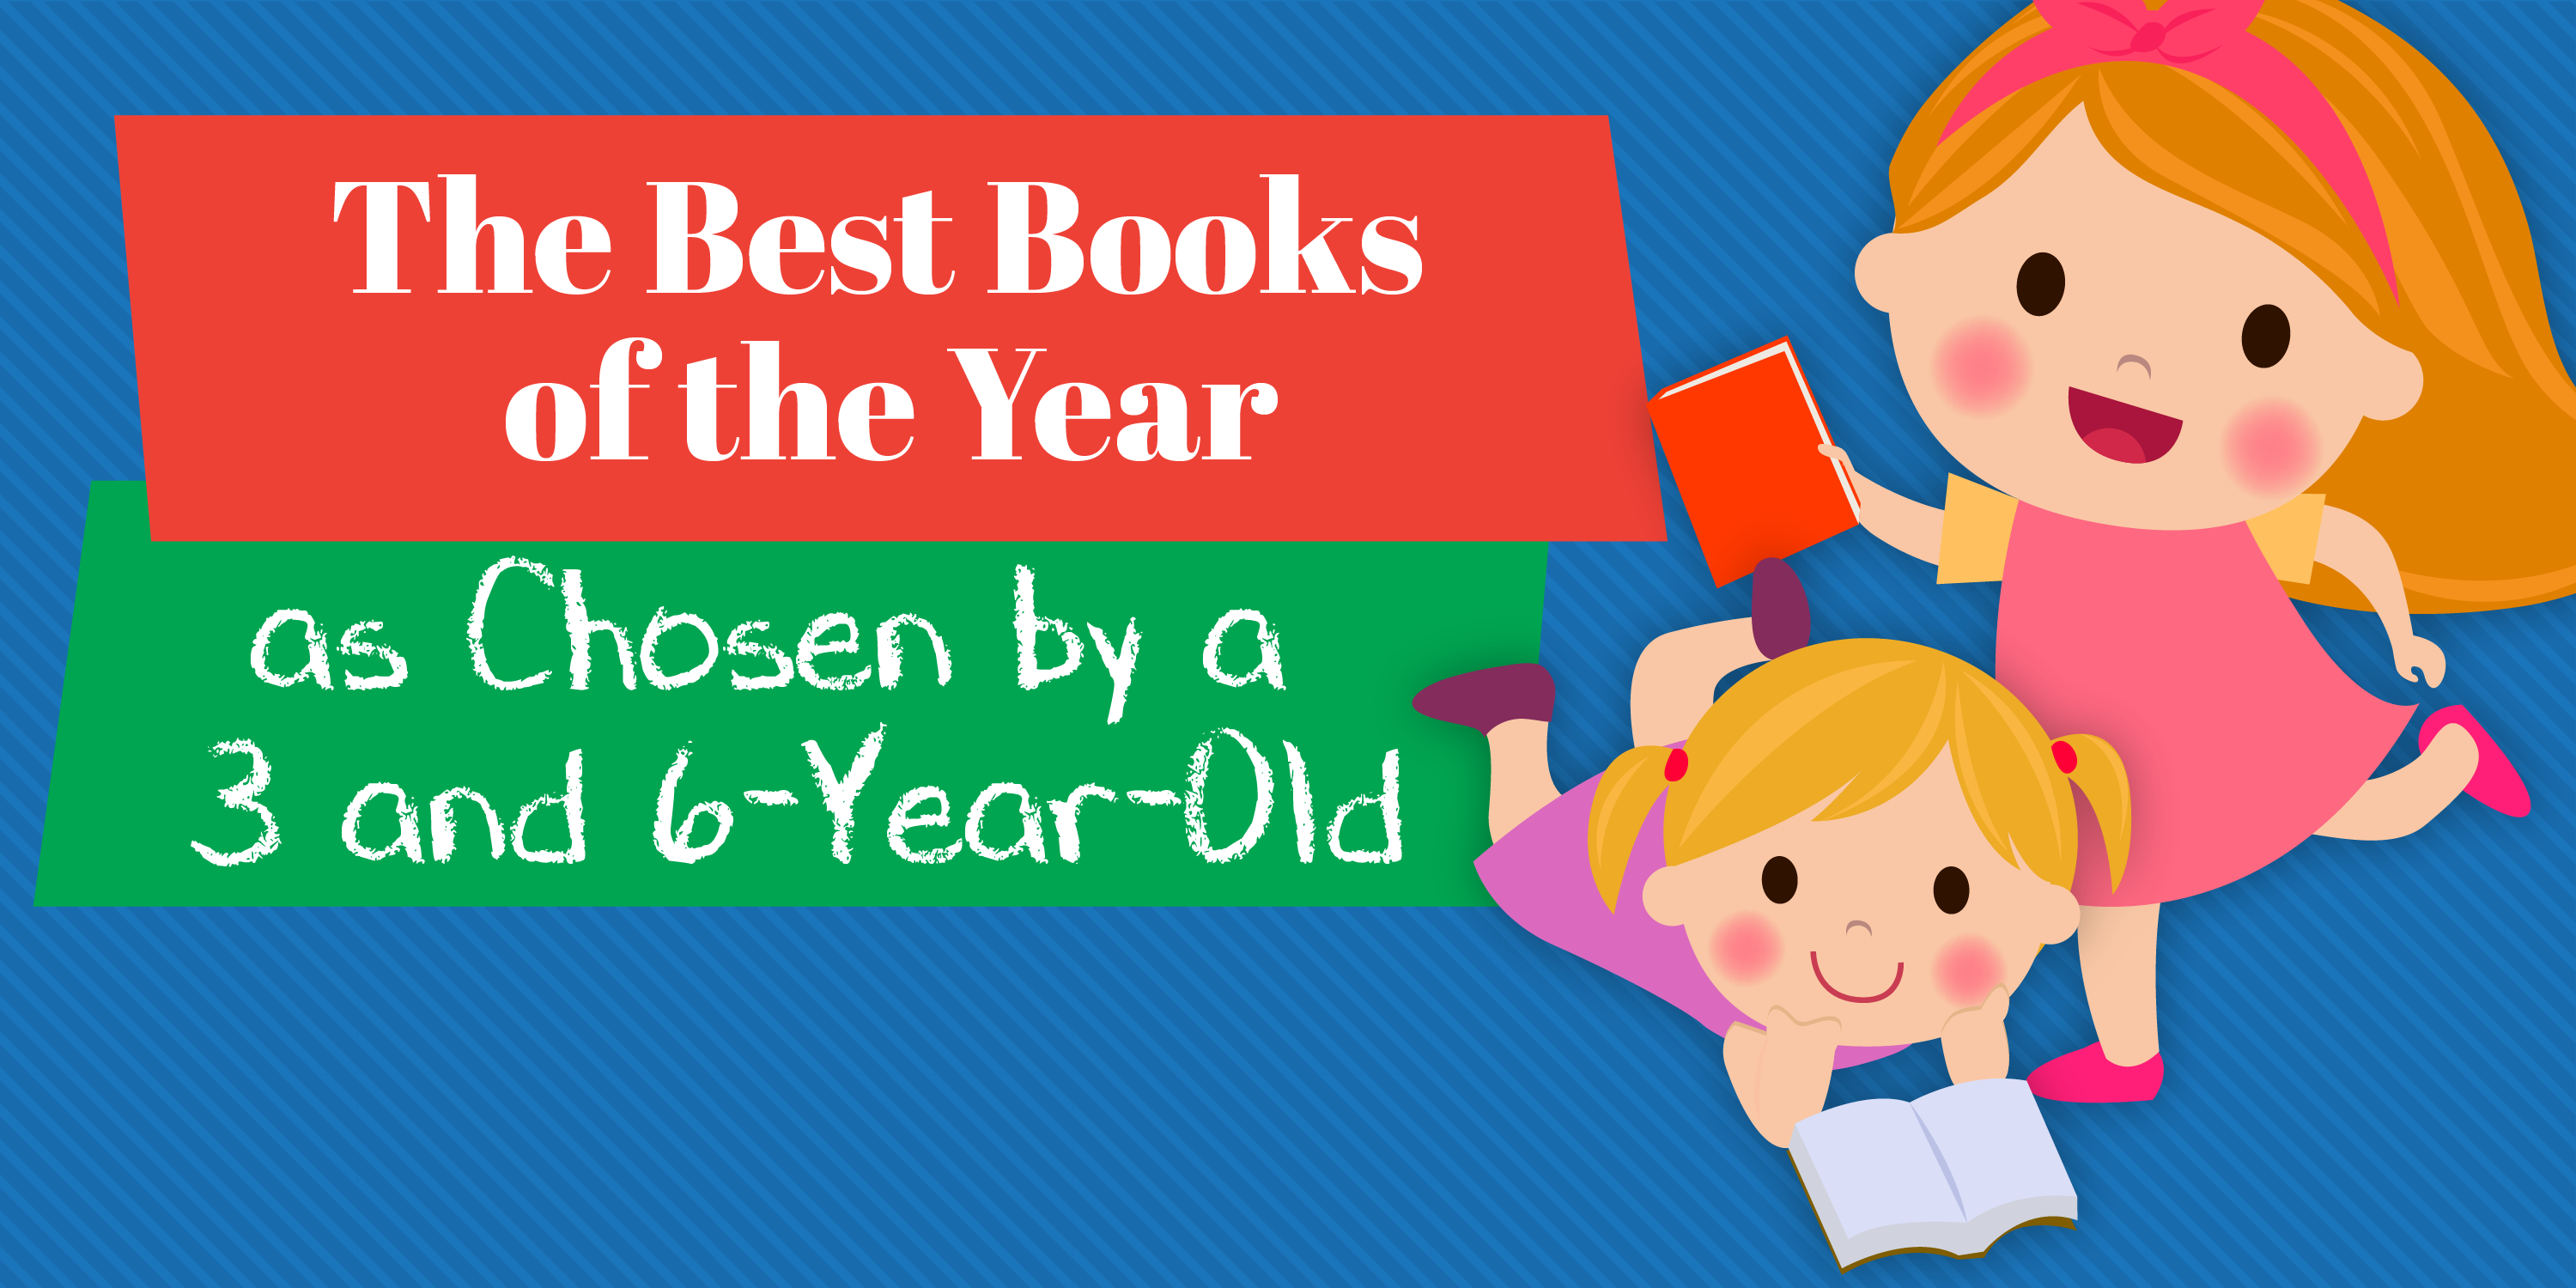 Best Books Of The Year, as Chosen by a 3 and 6 Year Old